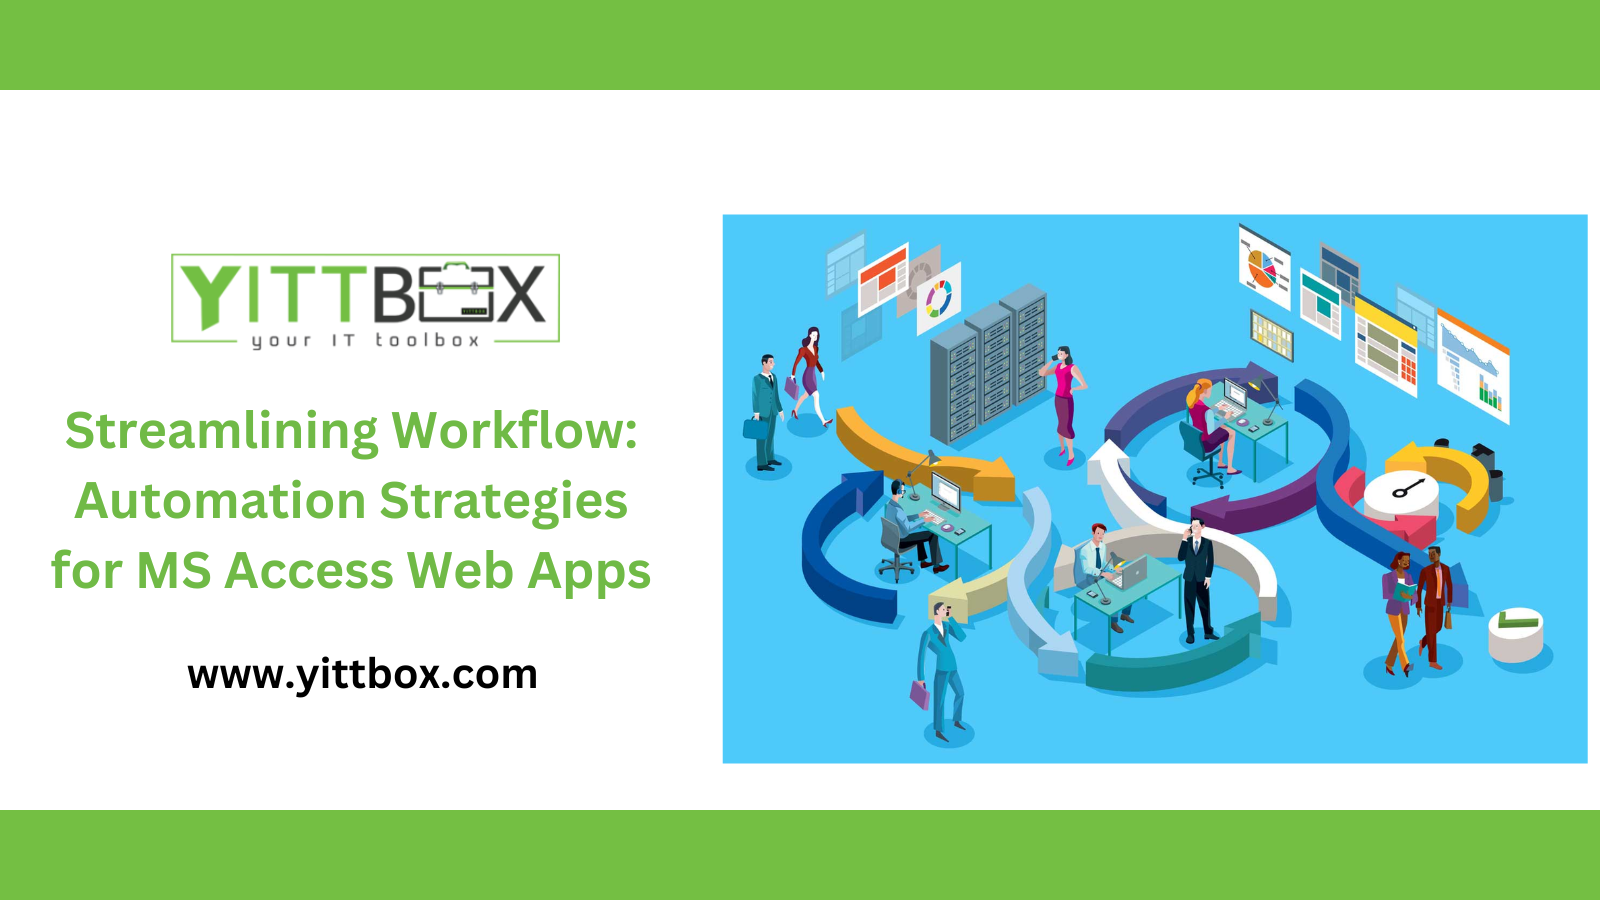 Streamlining Workflow: Automation Strategies for MS Access Web Apps